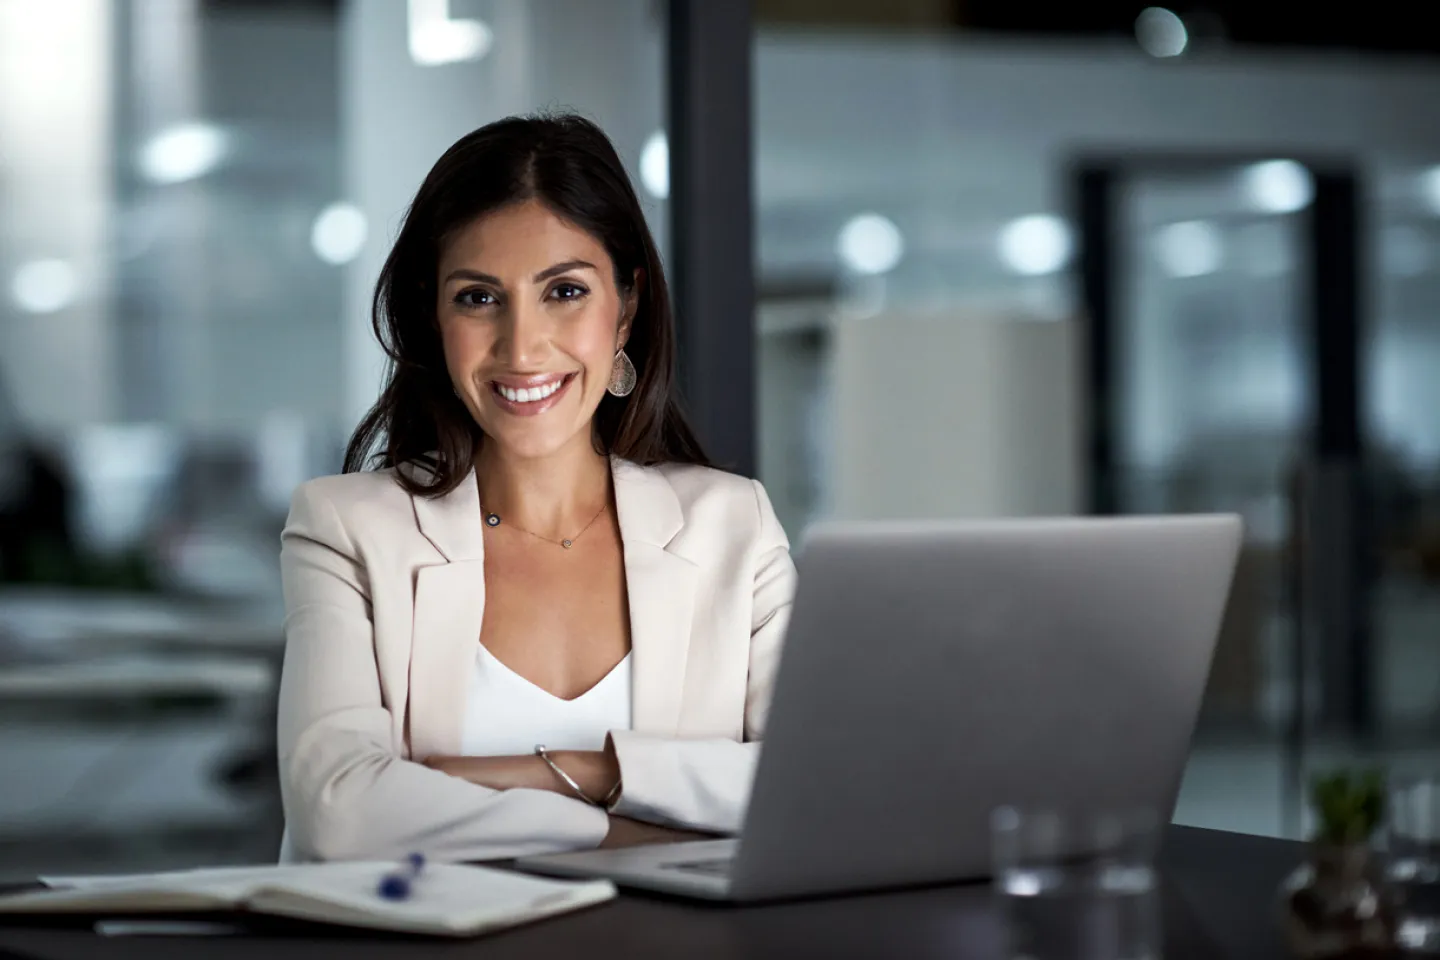 Smiling Business women sitting at desk in front of laptop